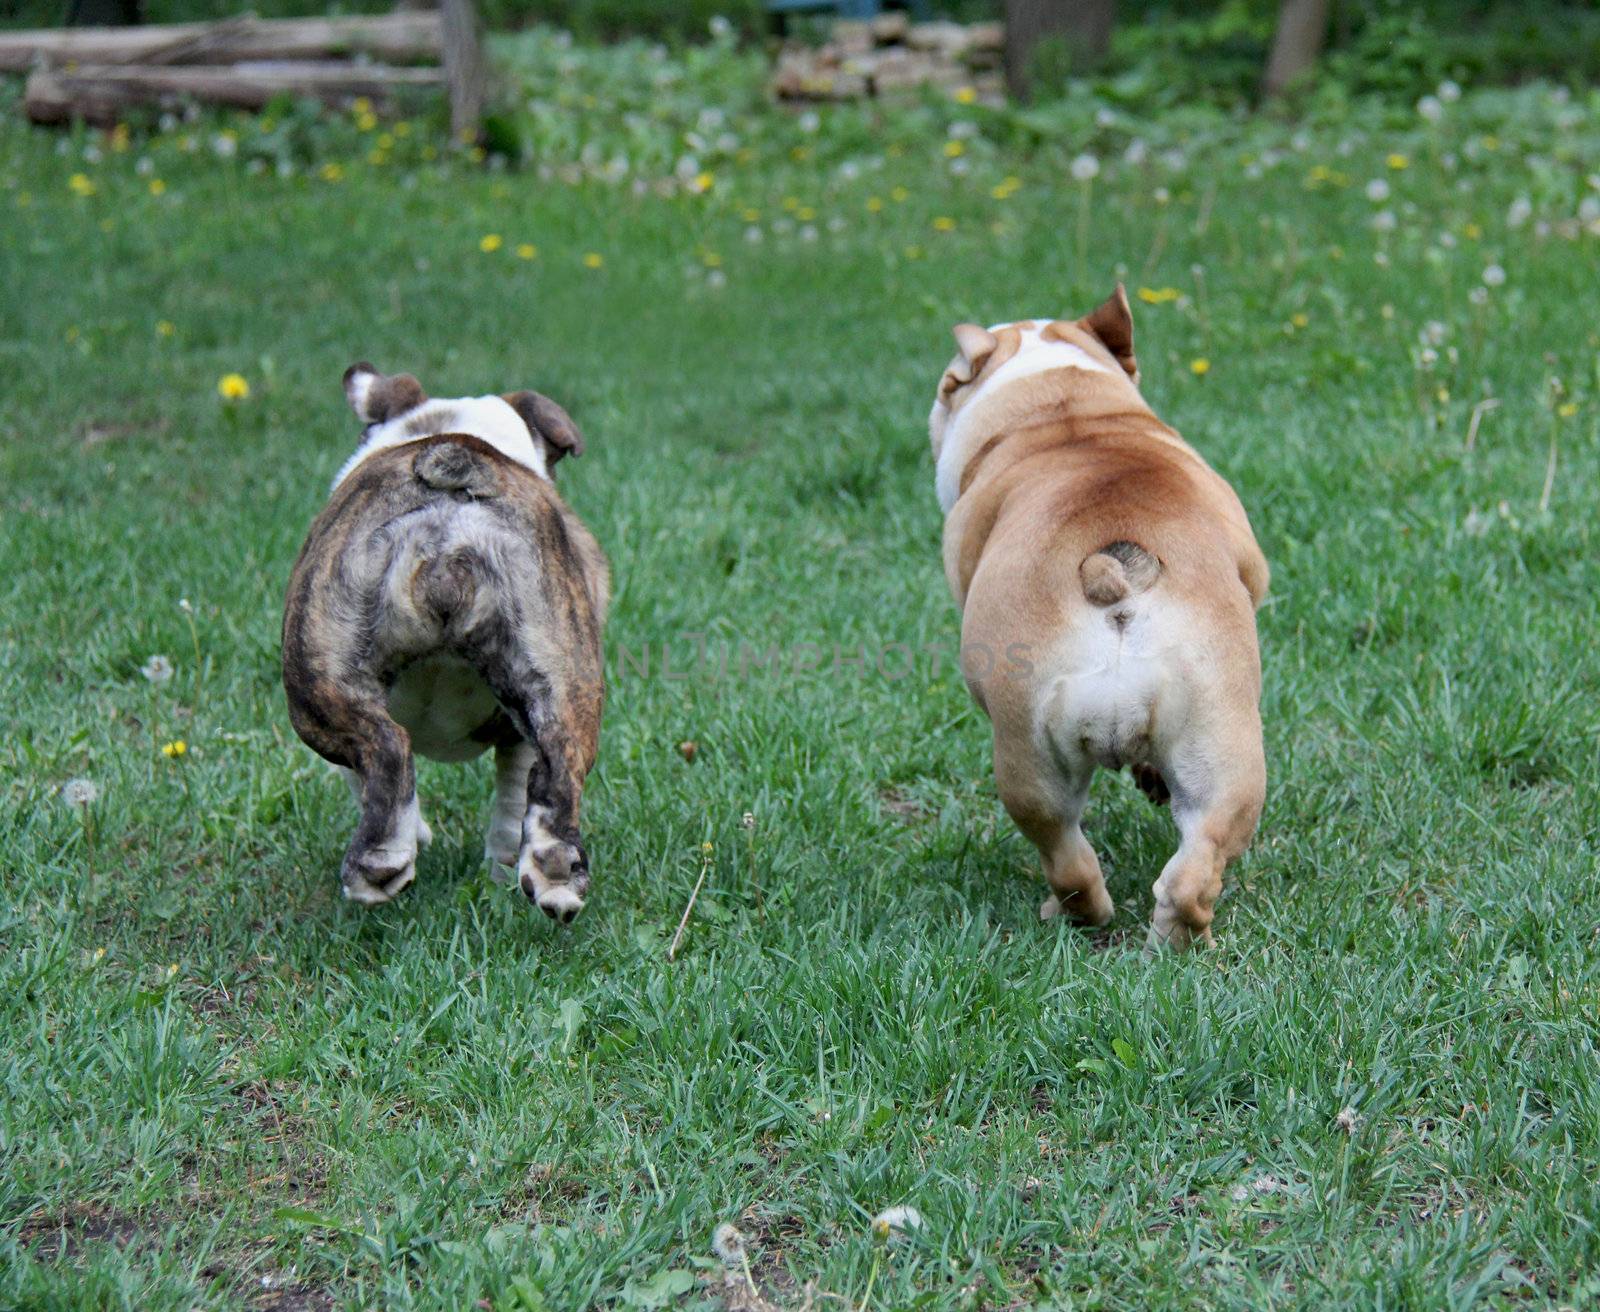 dogs running away - english bulldogs running side by side